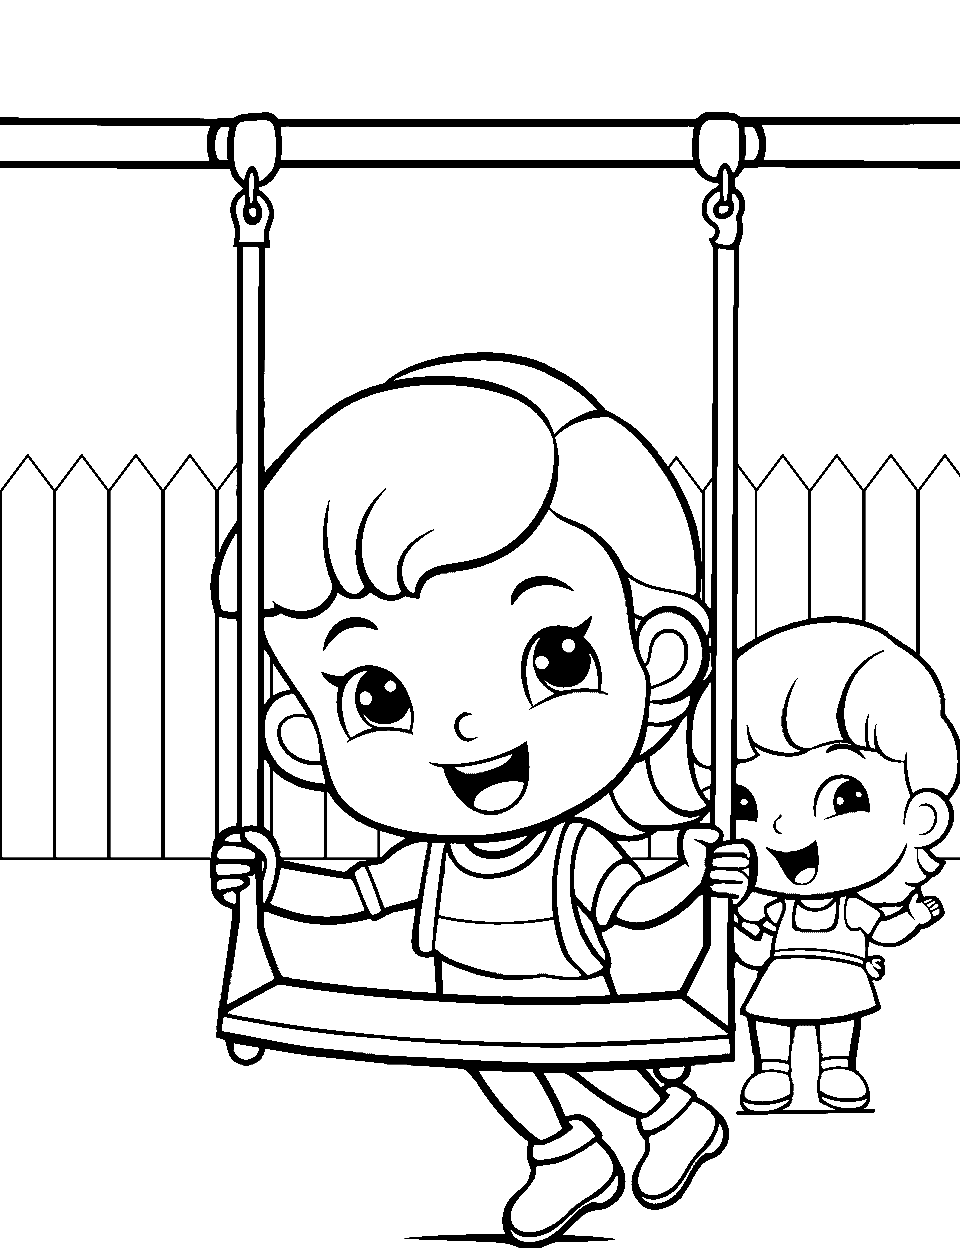 Playful Playground Coloring Page - Children playing on swings during recess.